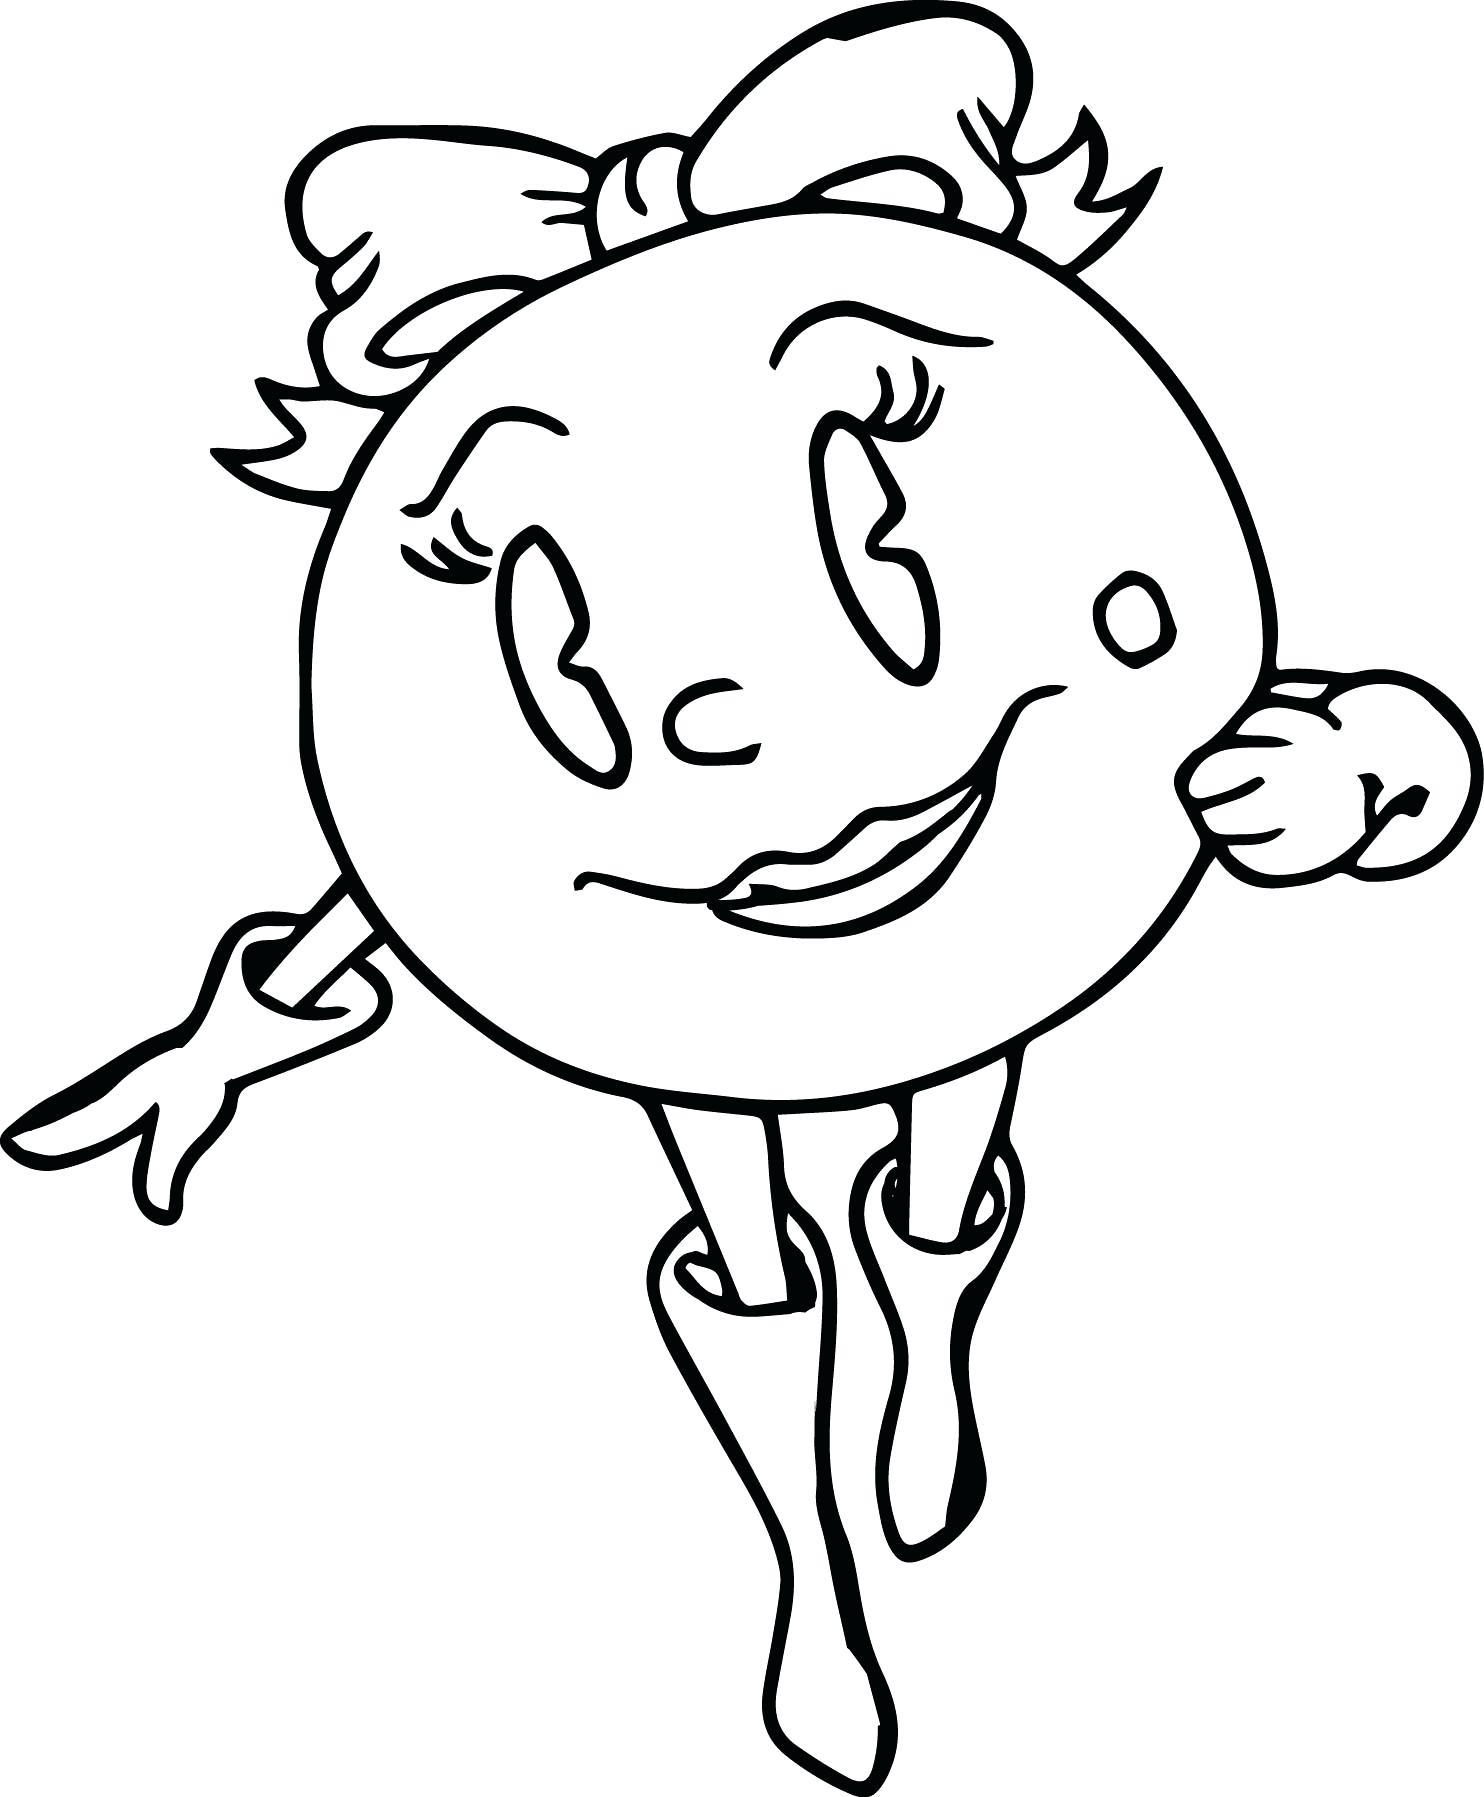 1484x1797 Fresh Coloring Pages Pacman Coloring Pages Pac Man Coloring Free.